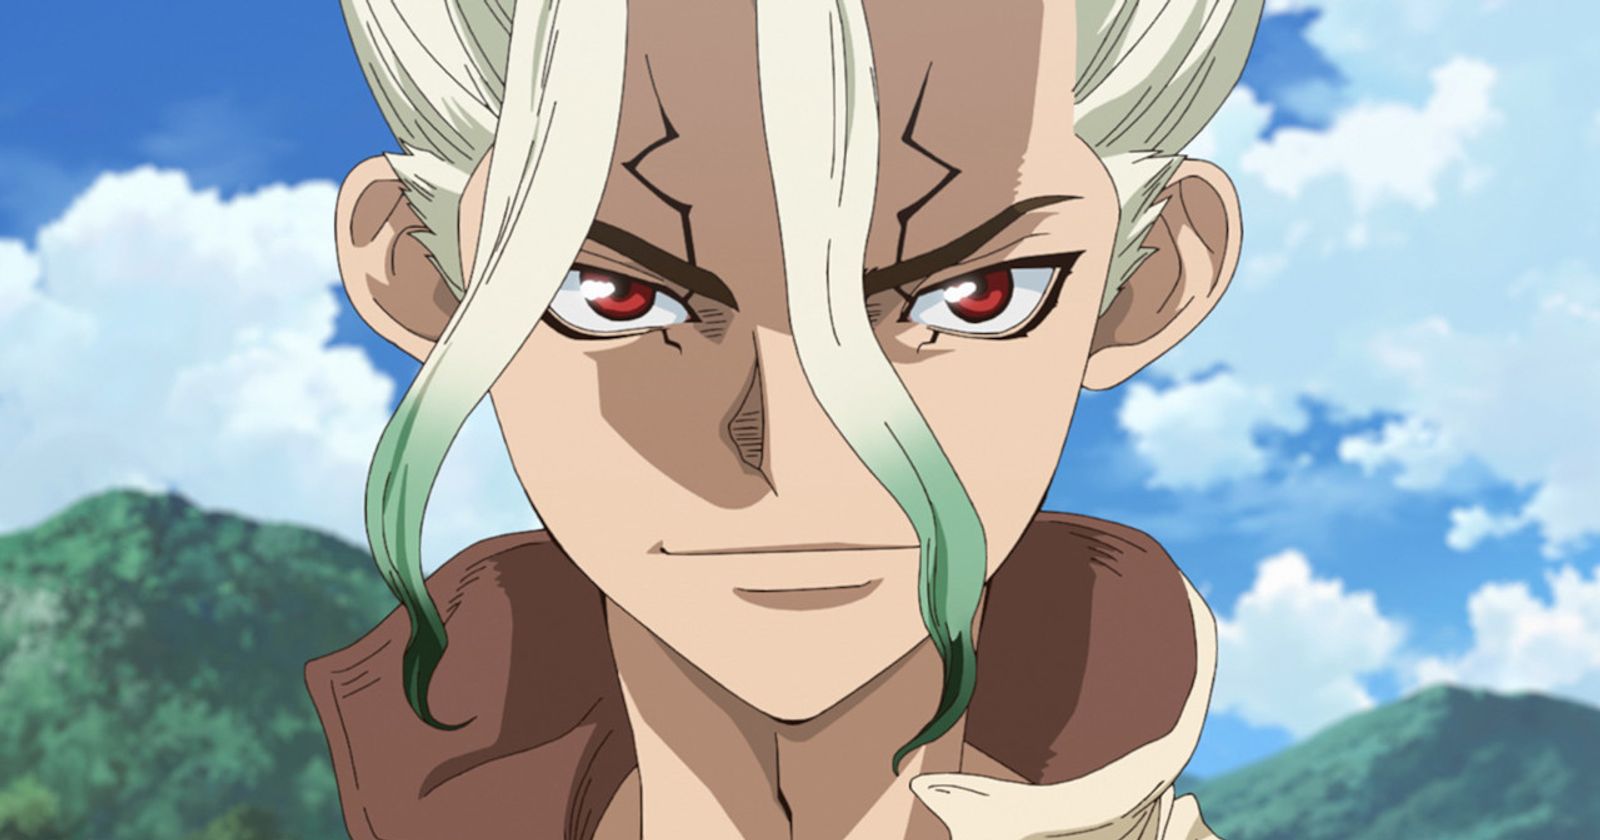 Dr. Stone Season 3 Episode 18 Streaming: How to Watch & Stream Online